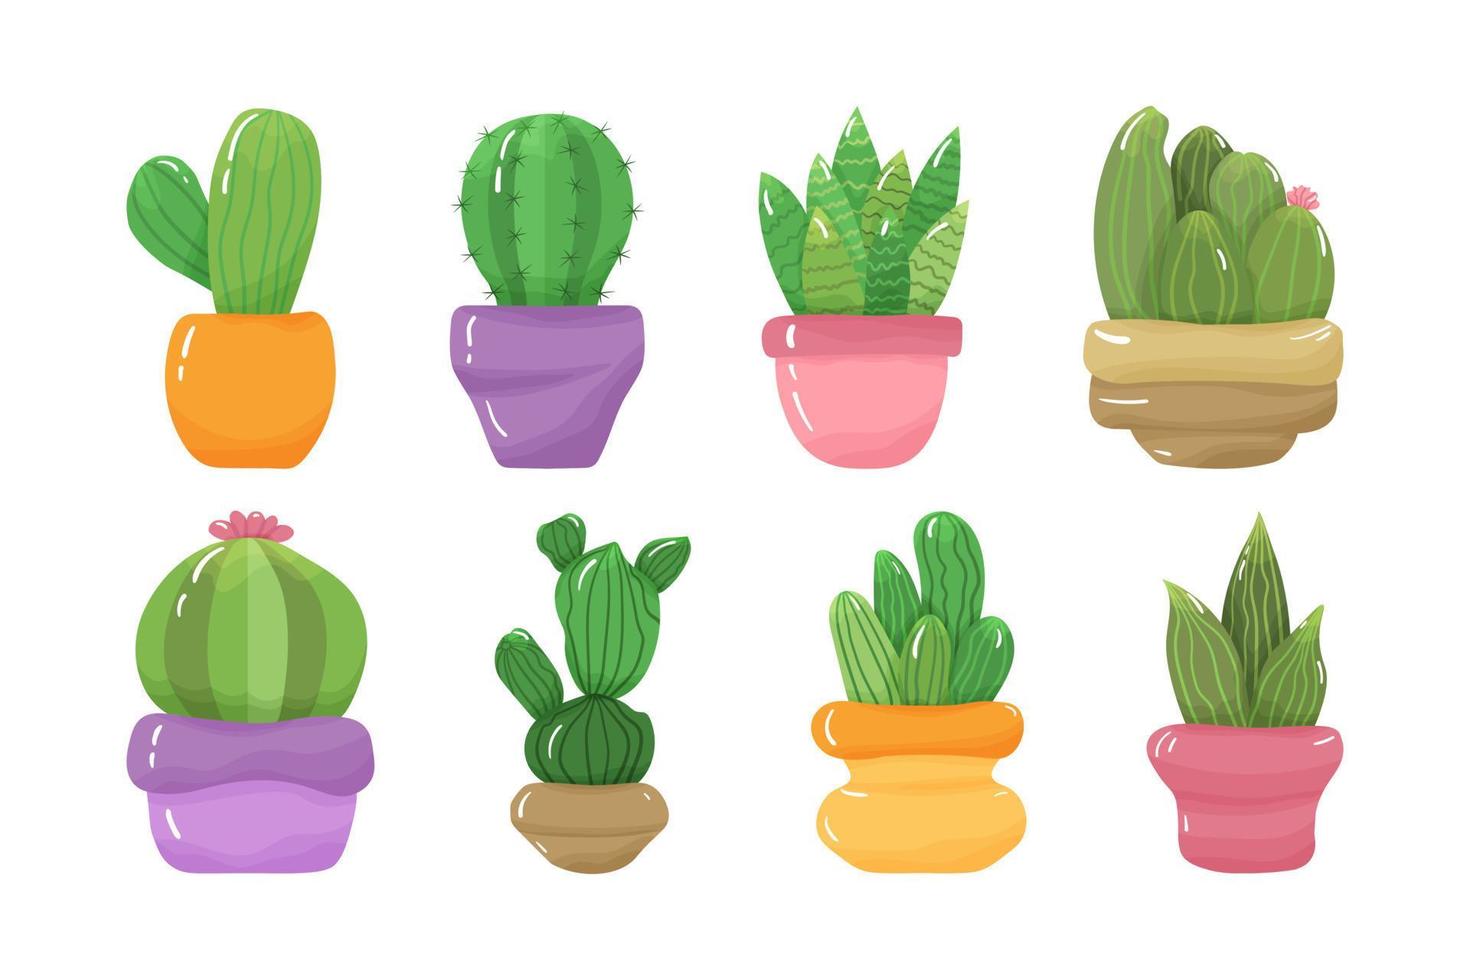 Set of cartoon green prickly cute cacti and succulents with blossoms and spikes in colorful pots. Design elements of houseplants, green cactus. Isolated on white background. vector